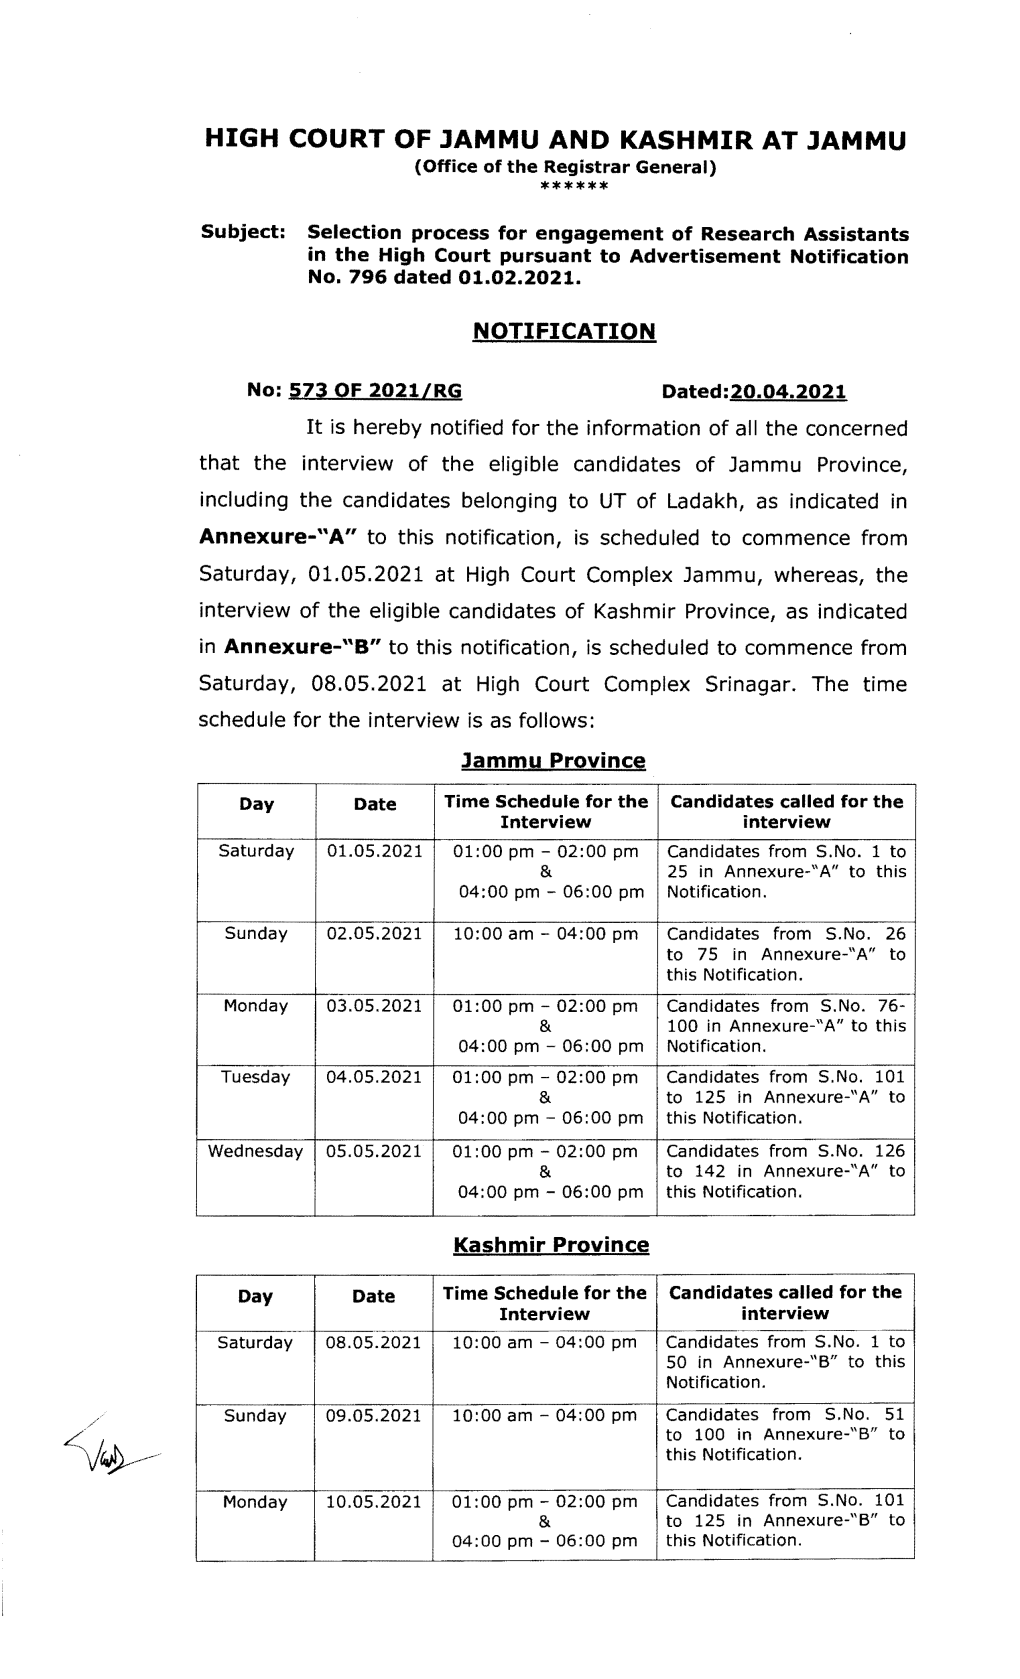 Selection Process for Engagement of Research Assistants in the High Court Pursuant to Advertisement Notification No